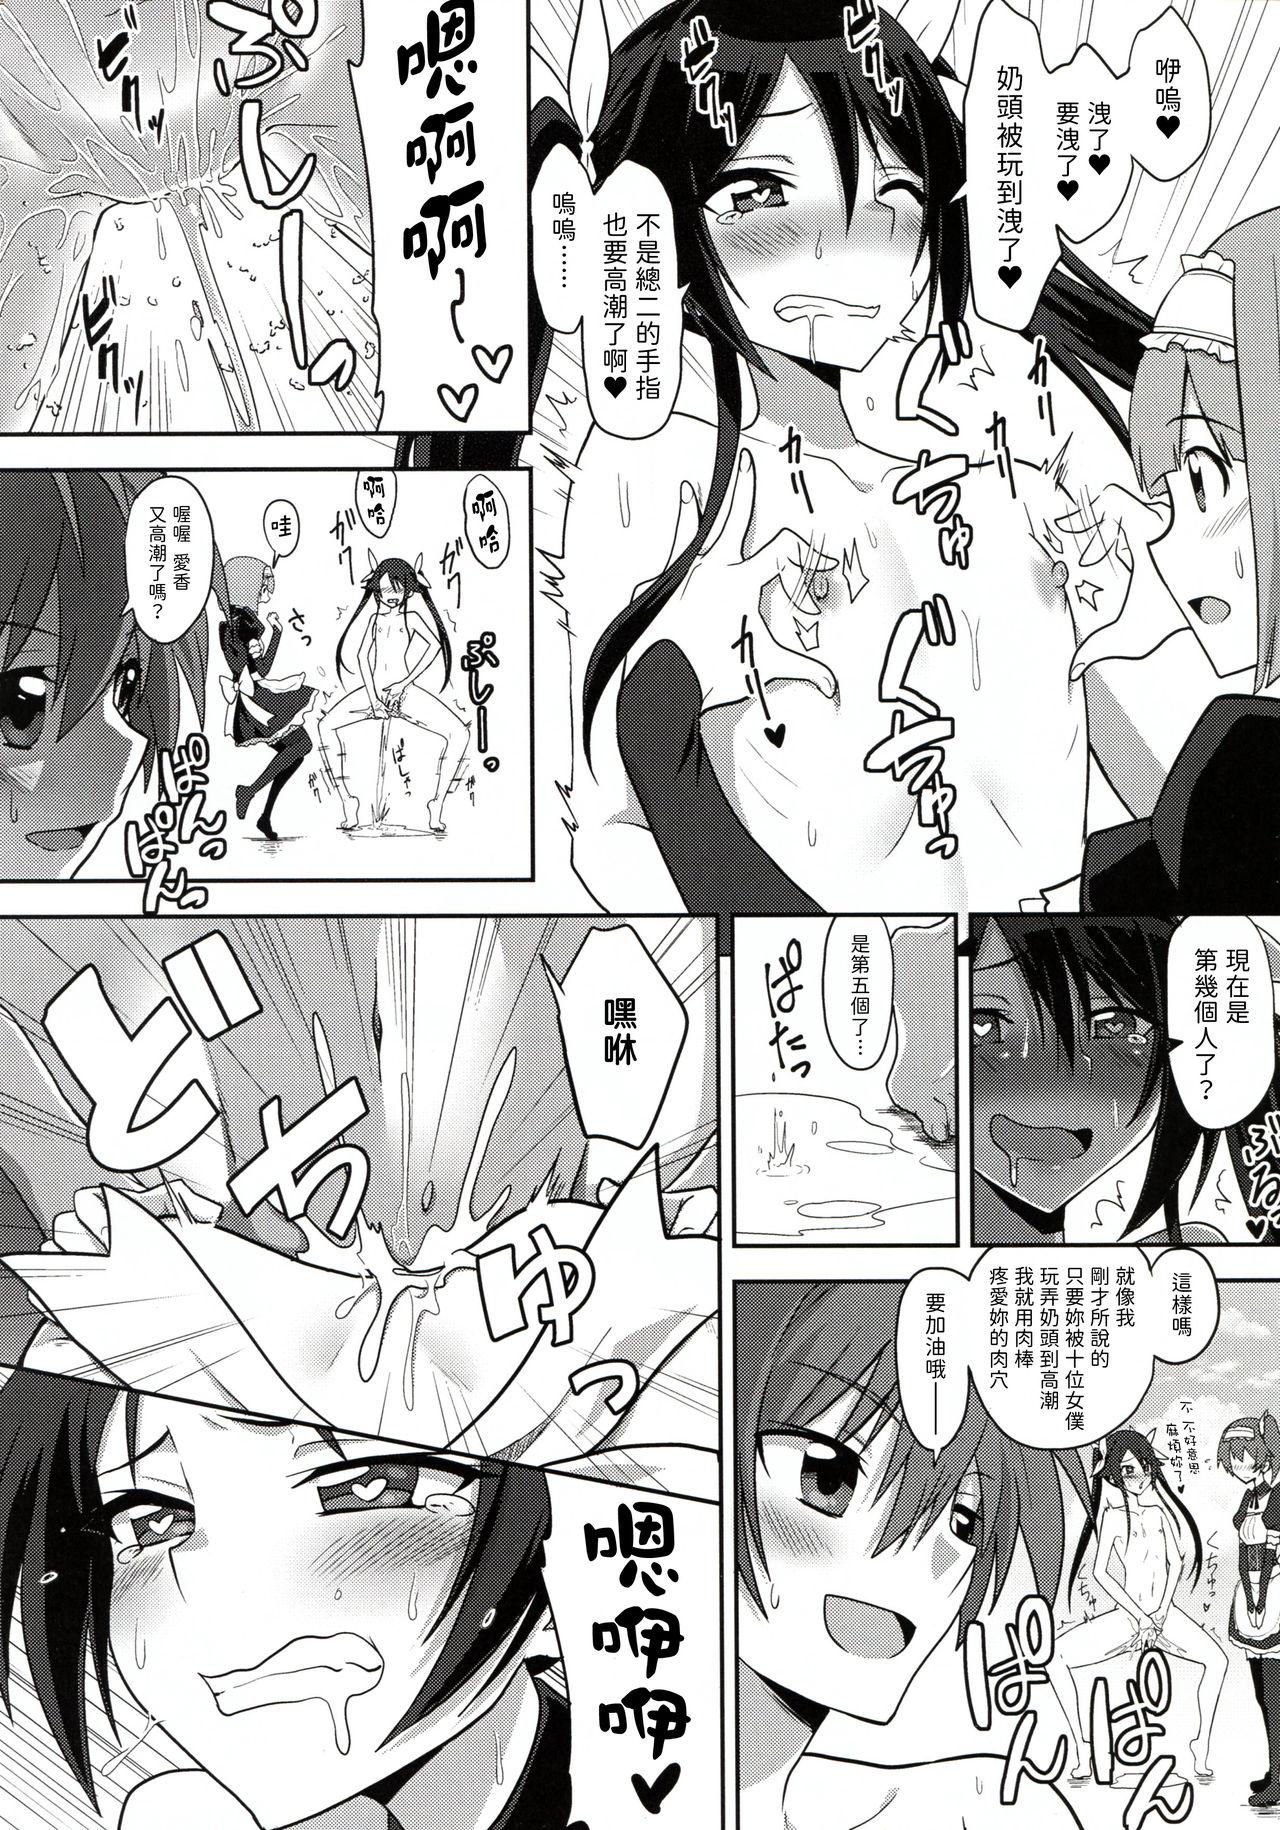 Ametur Porn Twintail Vacance - Ore twintail ni narimasu. | gonna be the twin-tails Webcam - Page 10